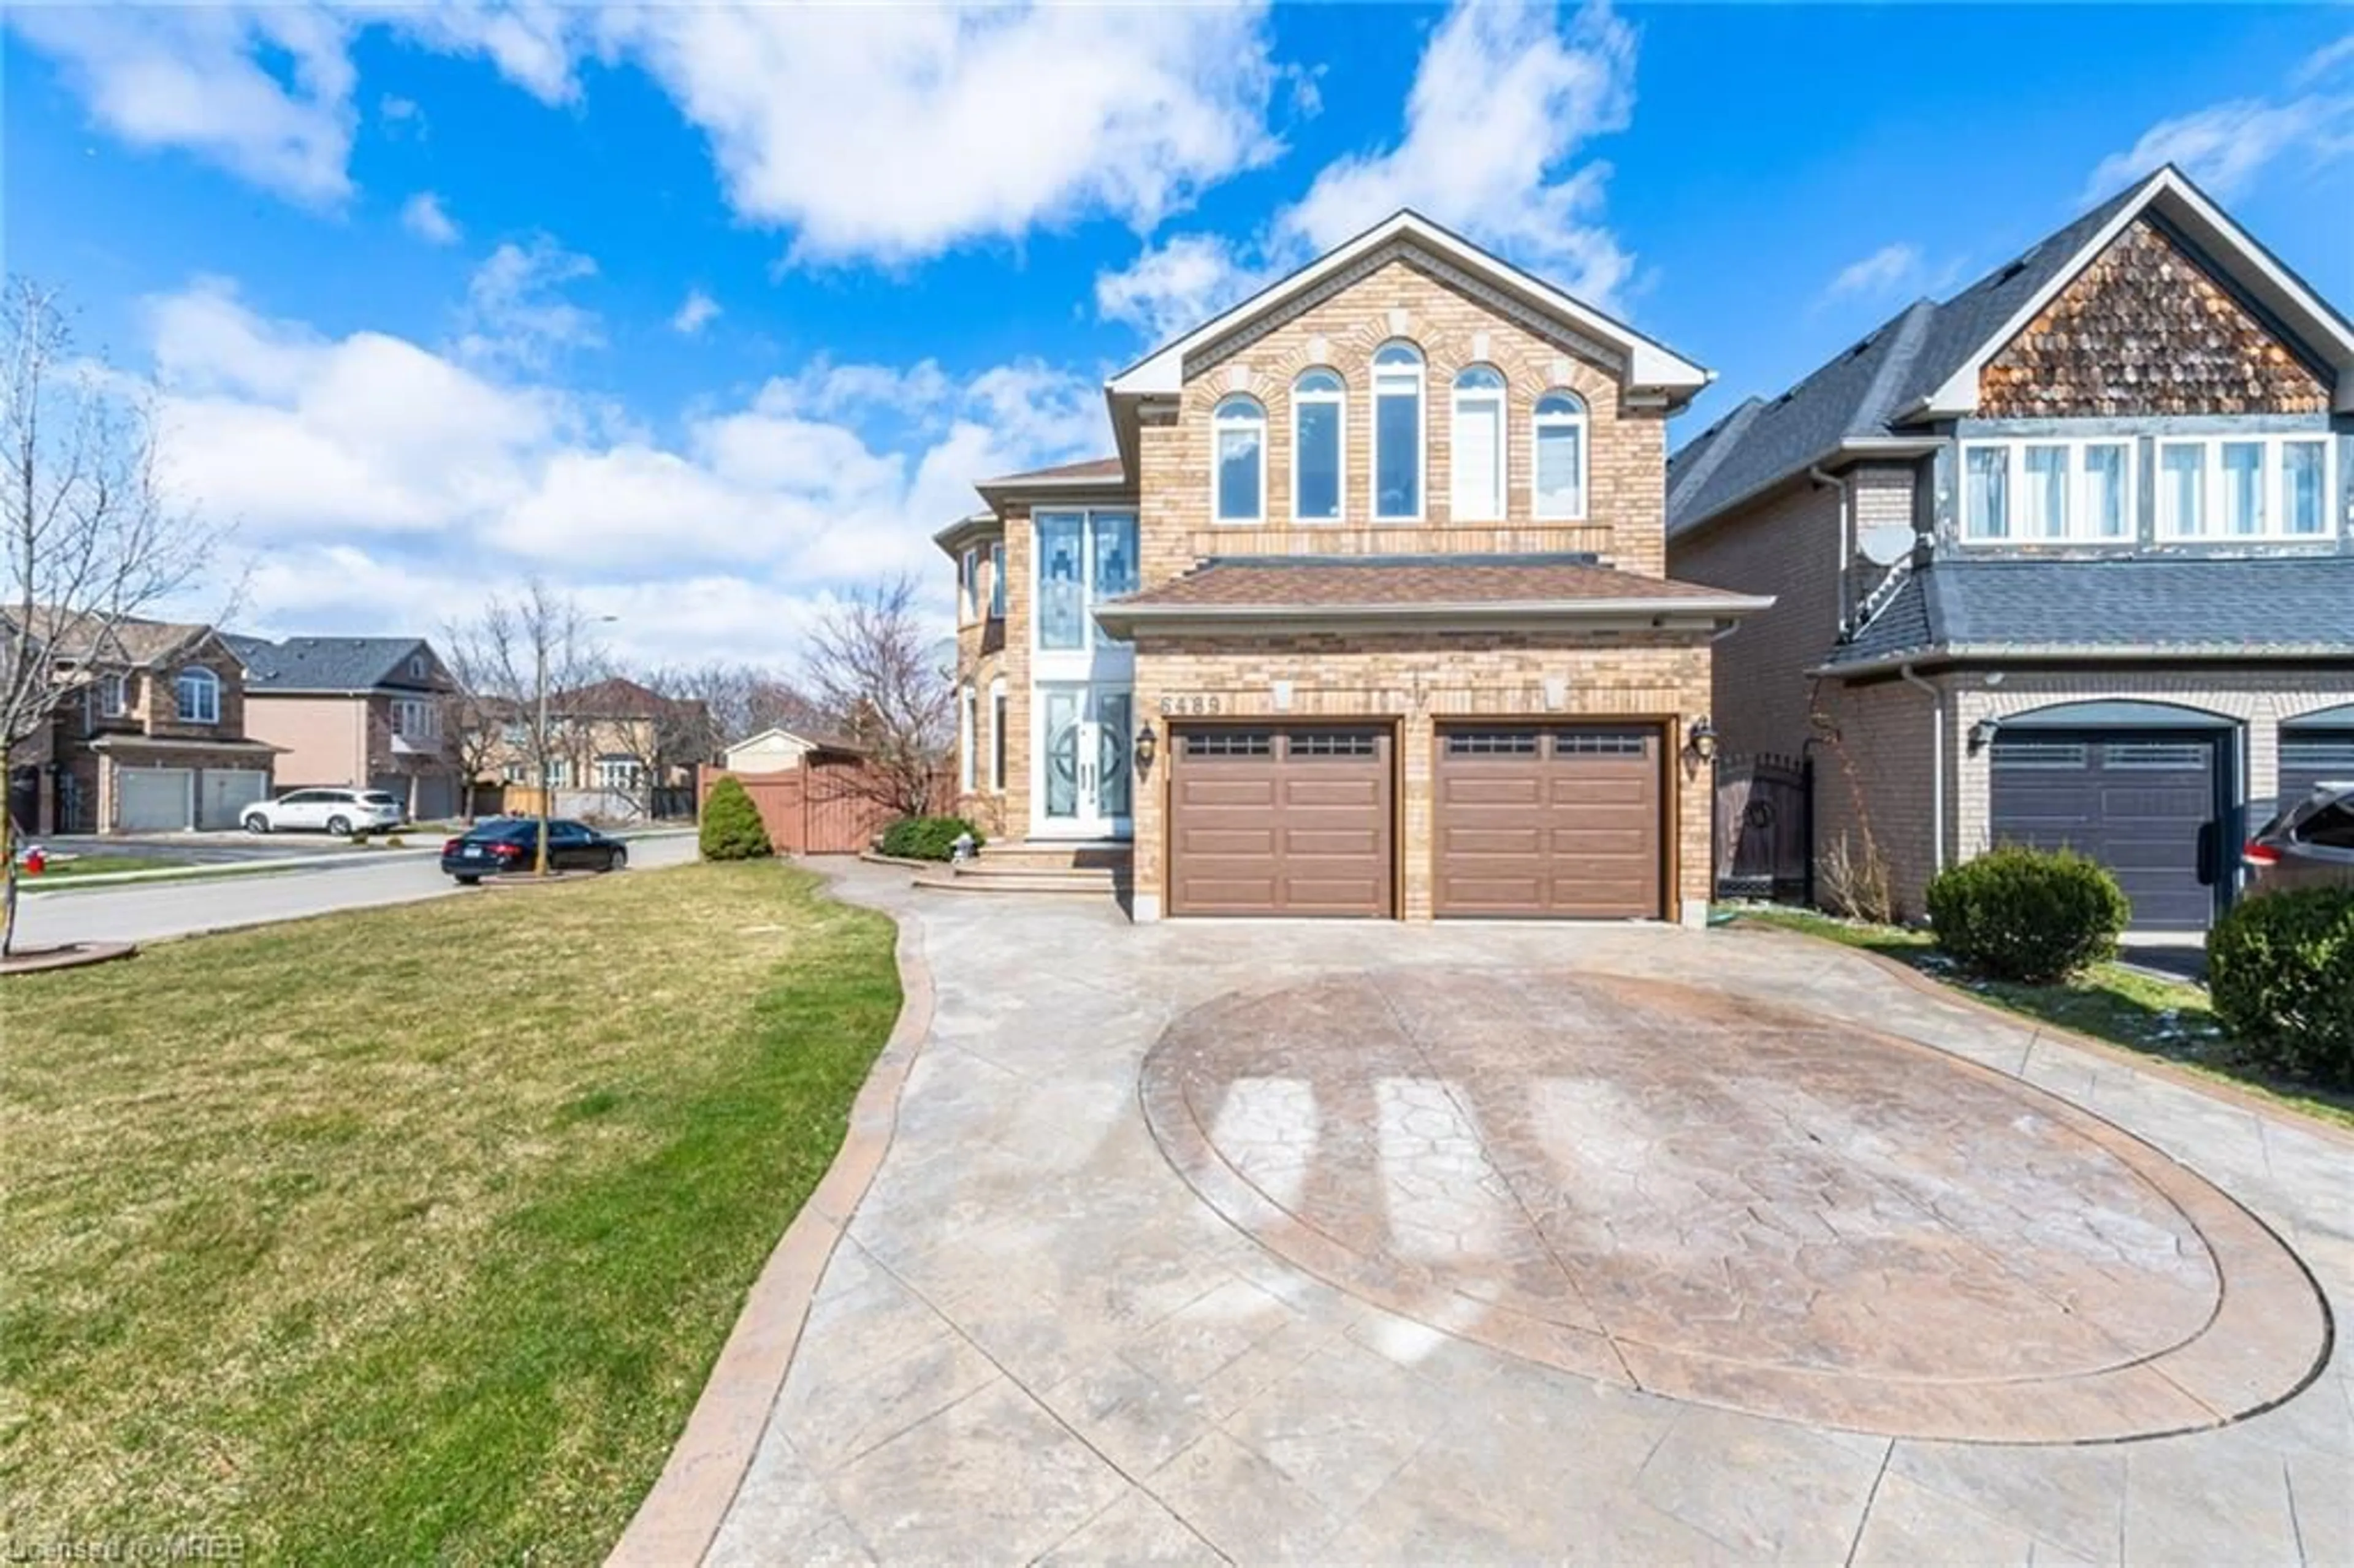 Frontside or backside of a home for 6489 Hampden Woods Rd, Mississauga Ontario L5N 7W1